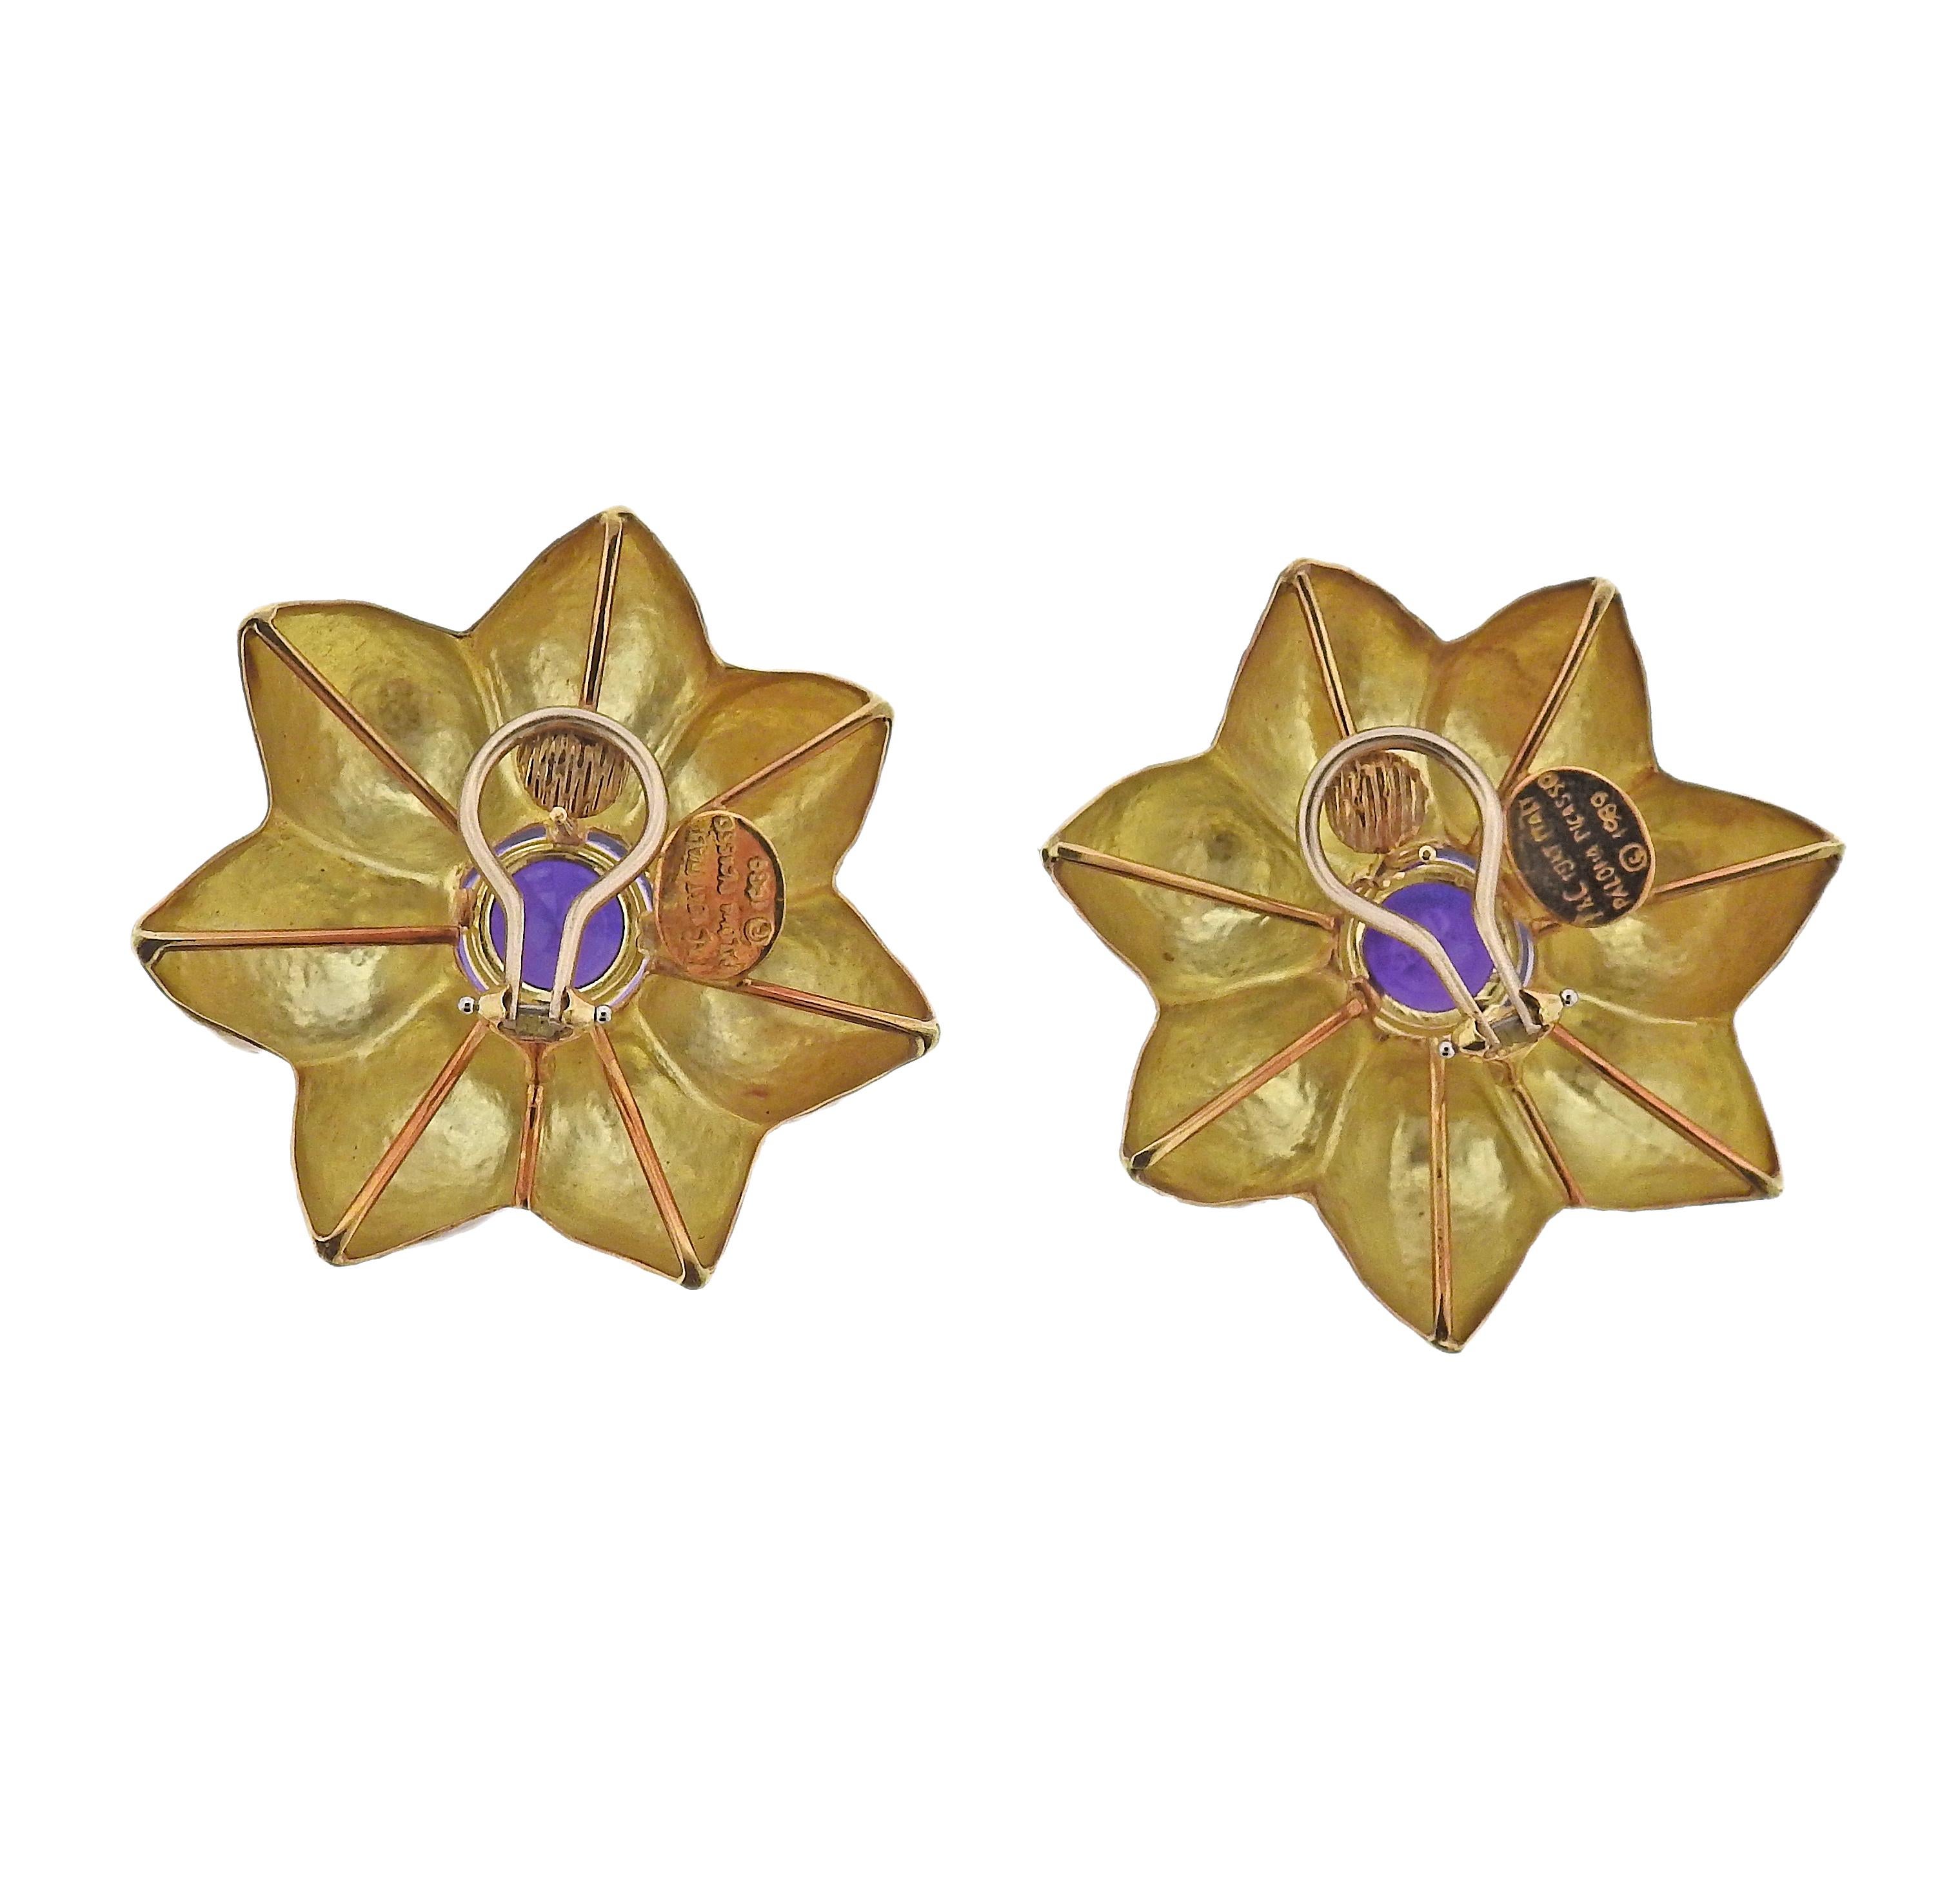 Pair of large 18k hand hammered gold flower earrings, with 11.5mm amethysts in the center. Crafted by Paloma Picasso for Tiffany & Co.  Earrings are 40mm x 40mm. Marked: T & Co, Paloma  Picasso, 1989, 18kt, Italy. Weight - 26.4 grams. 